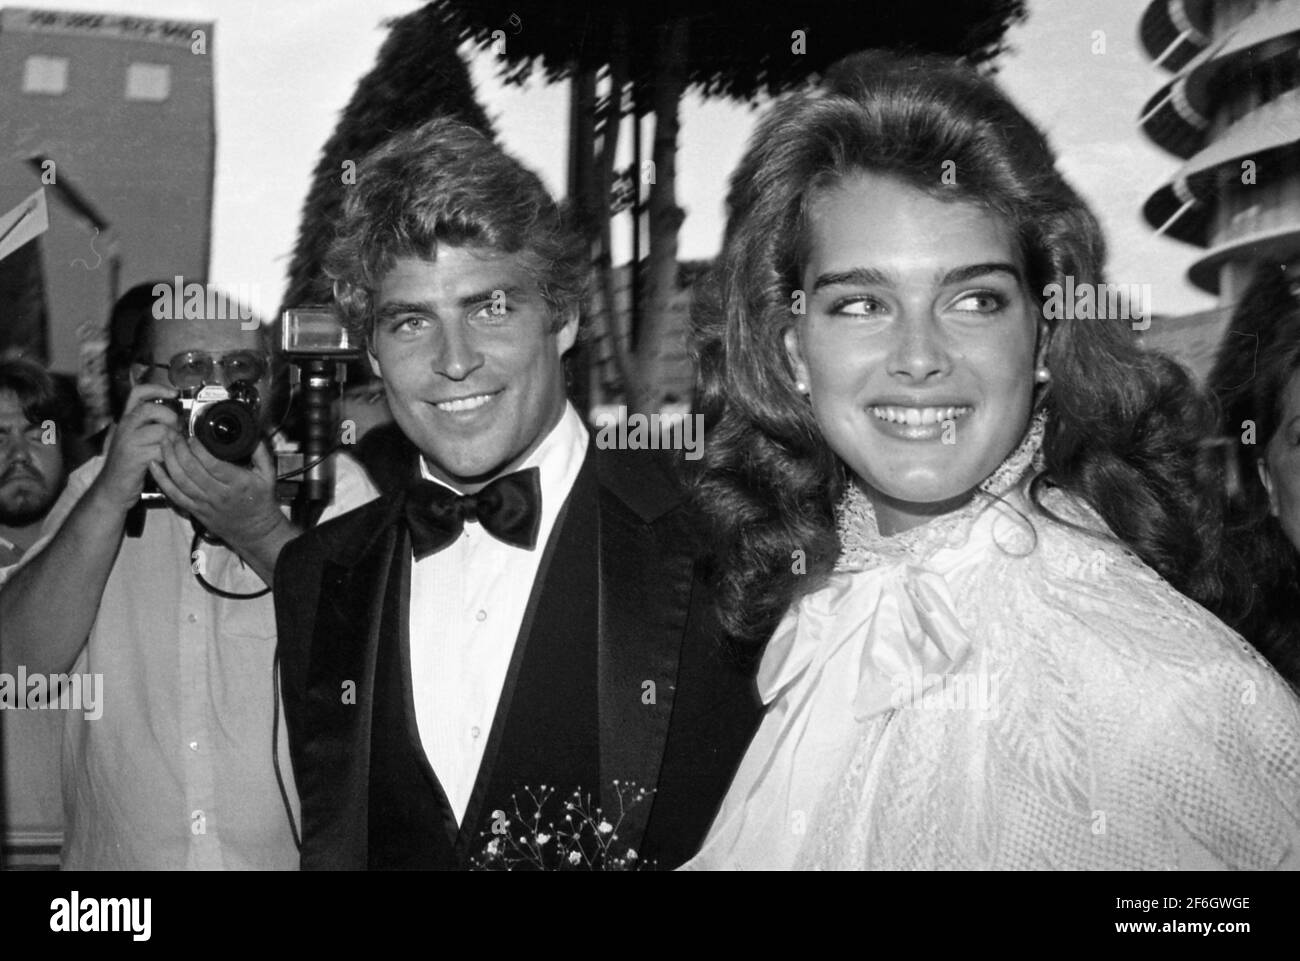 Ted McGinley and Brooke Shields December 20, 1979. Credit Ralph